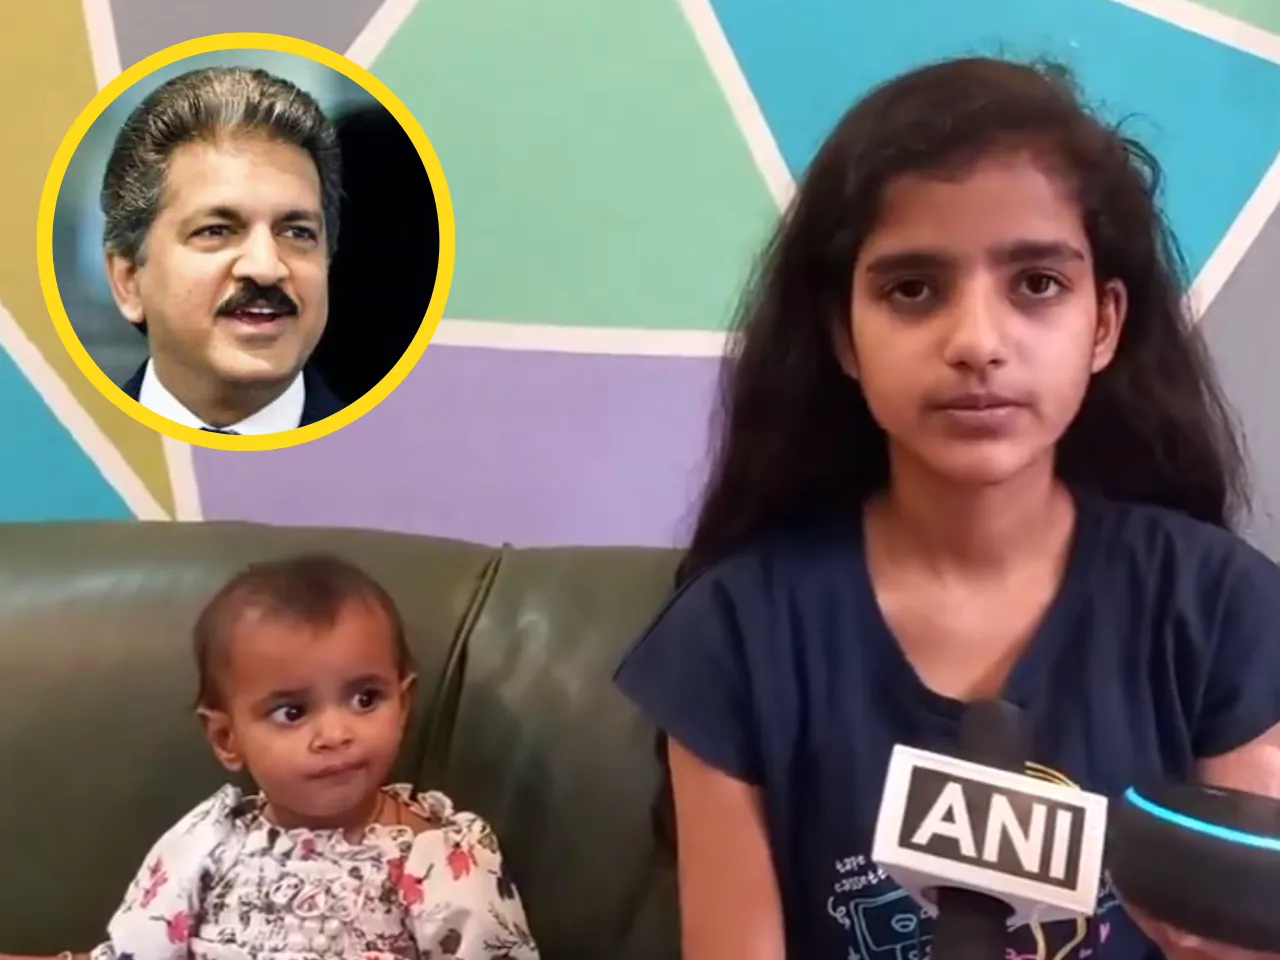 Anand Mahindra offers job to 13-yr-old girl who thwarted monkey attack using Amazon Alexa